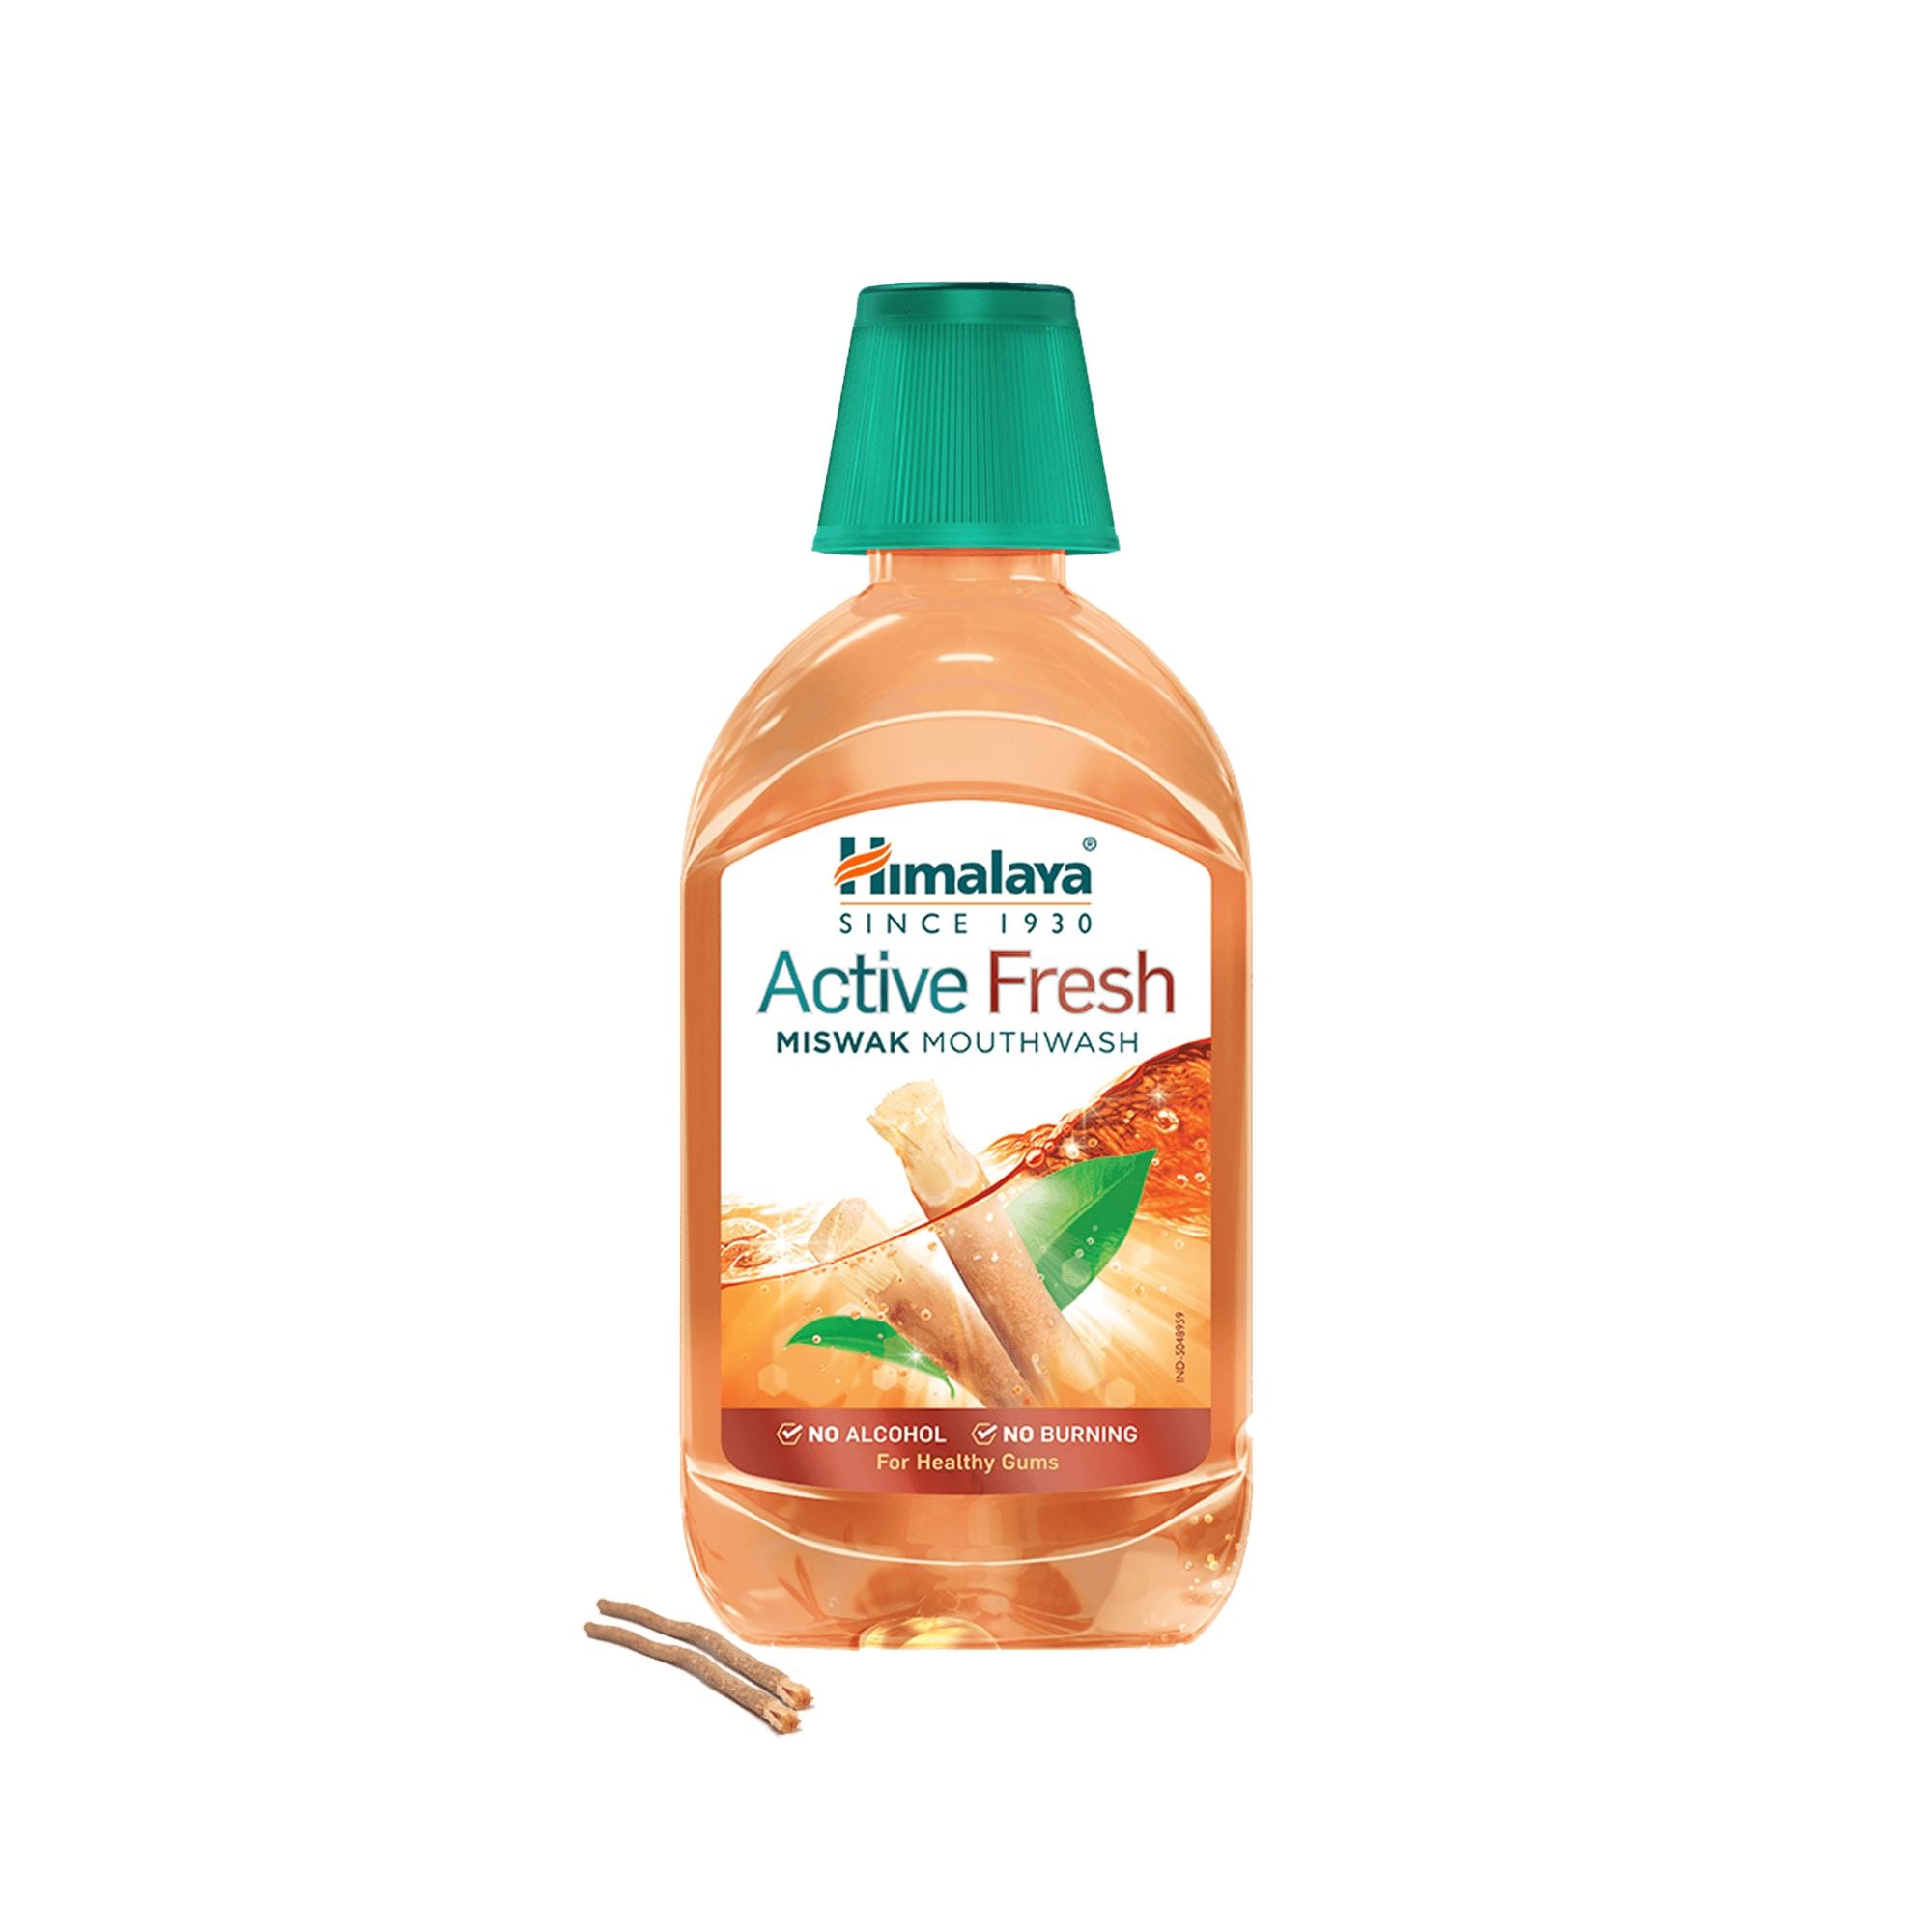 Himalaya Active Fresh Miswak Mouthwash - Prevents Mouth Odor